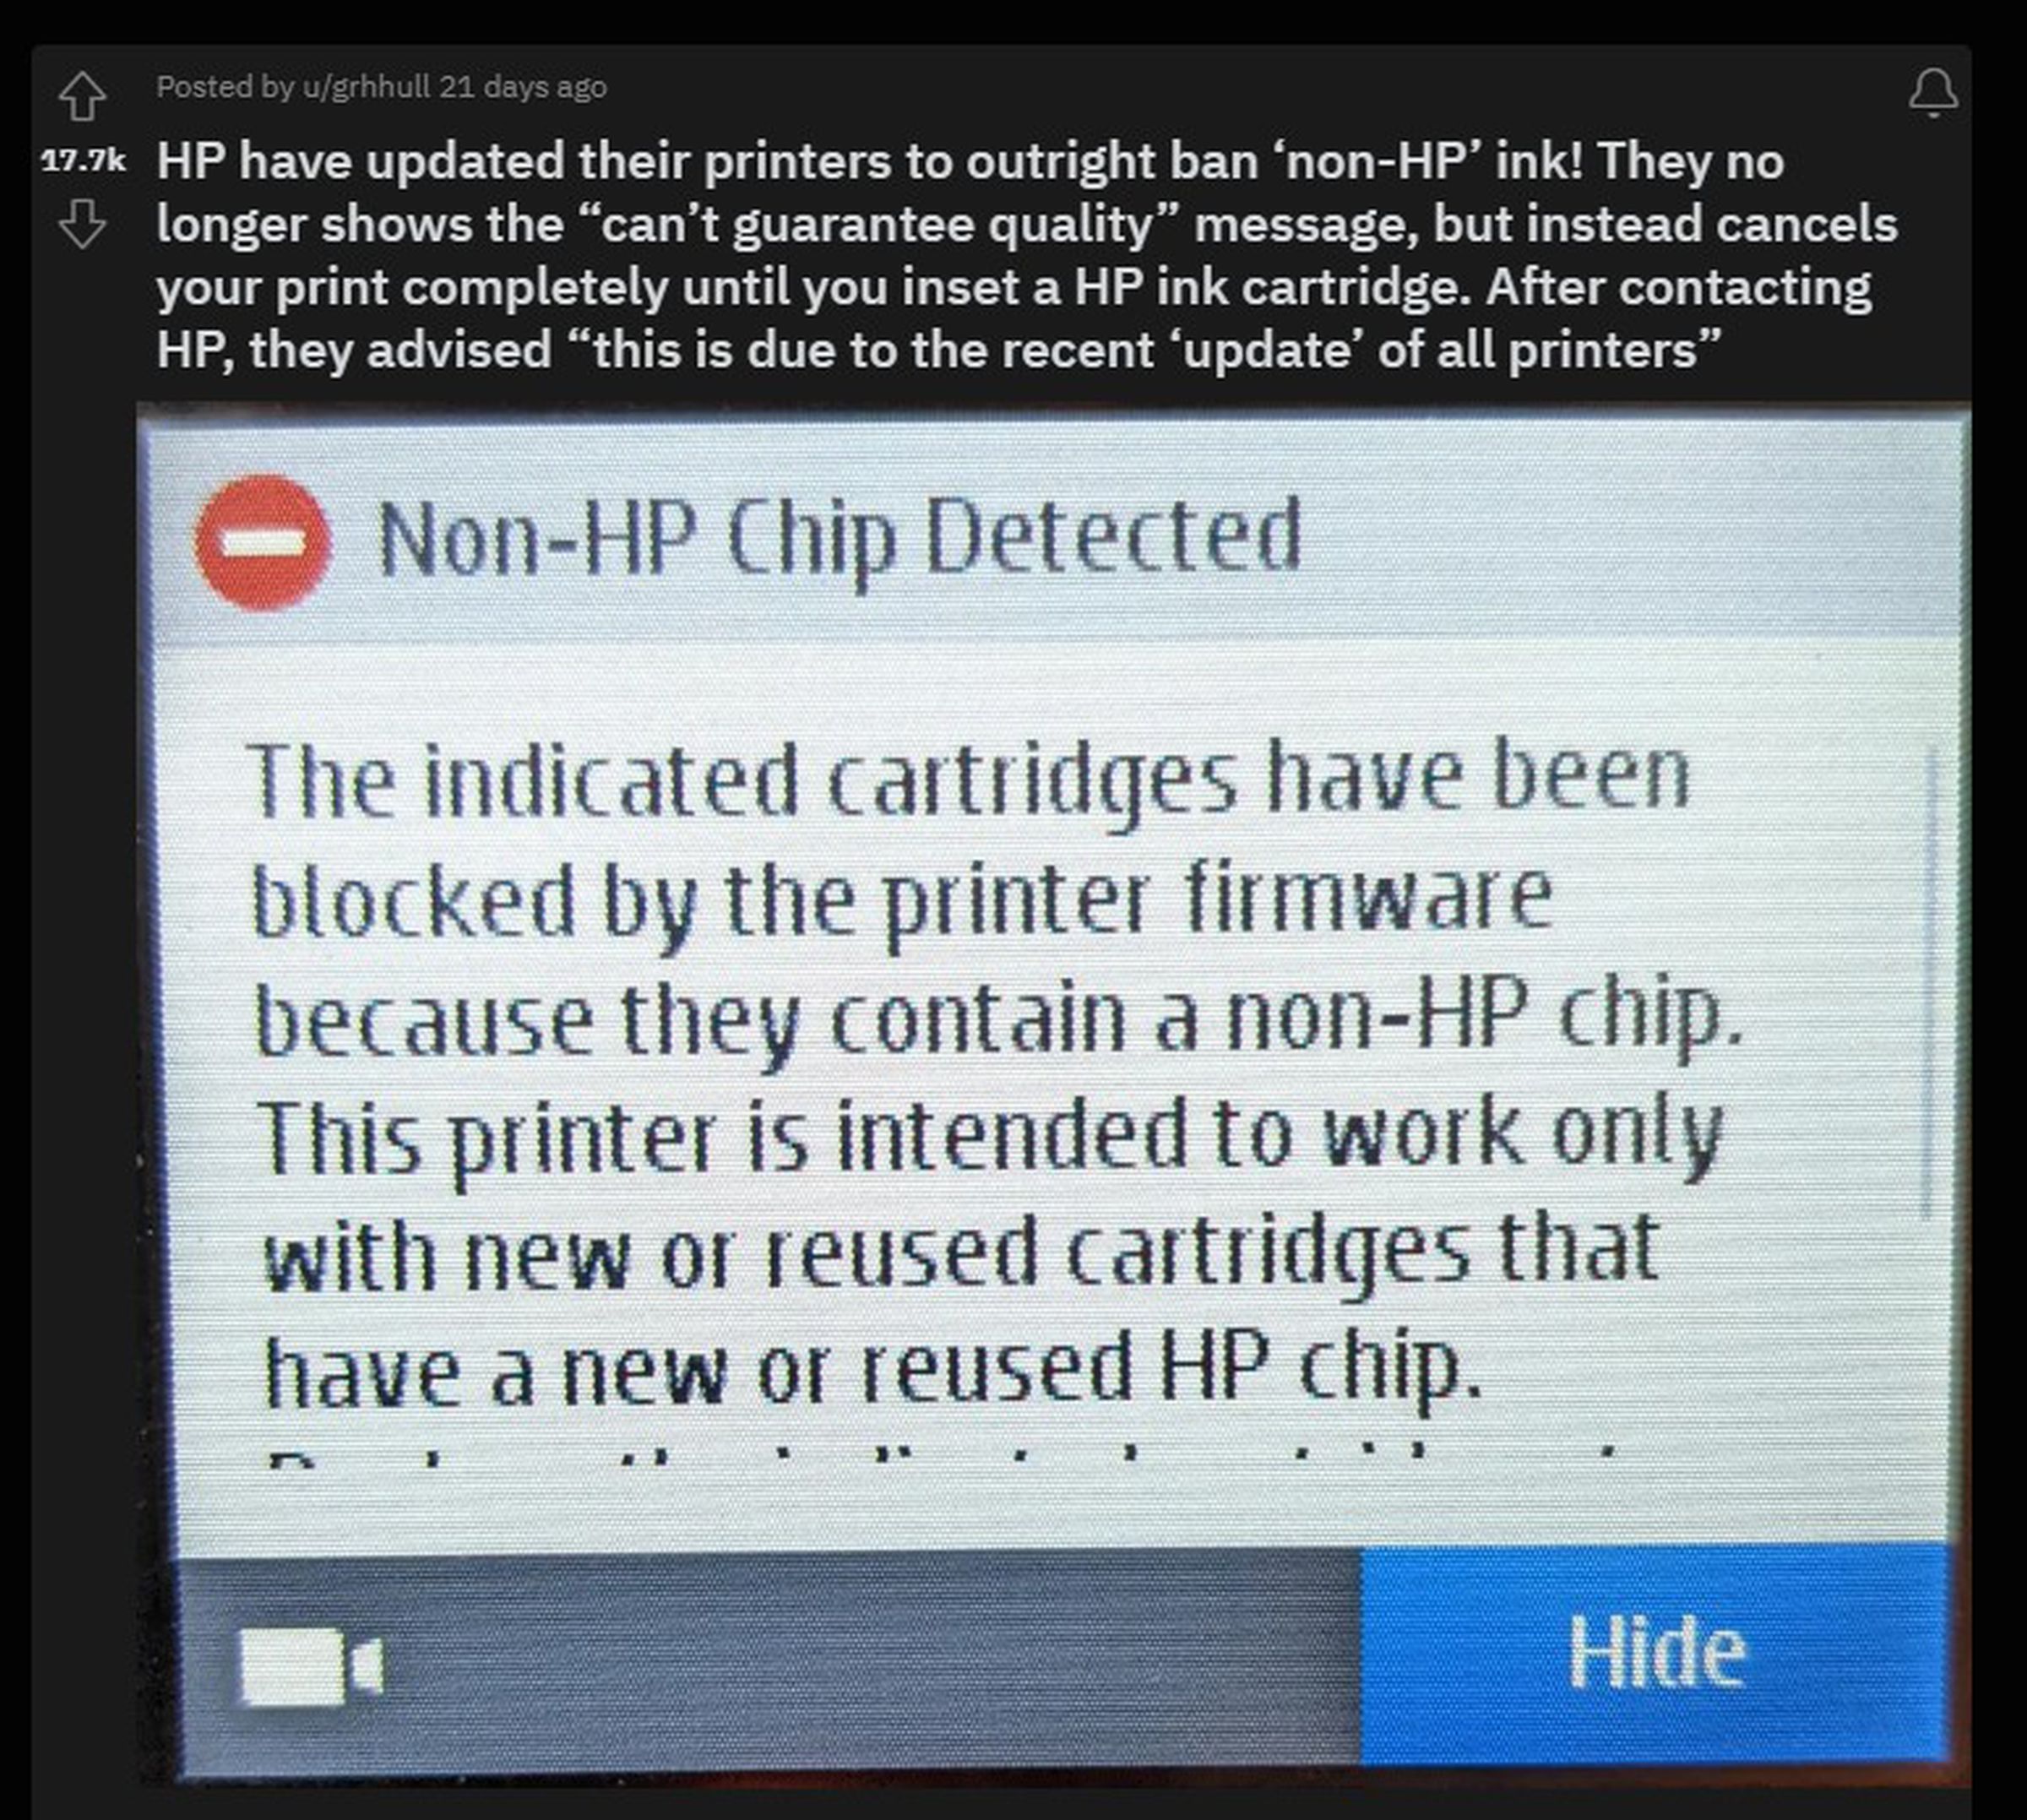 Non-HP Chip Detected, the error message reads.